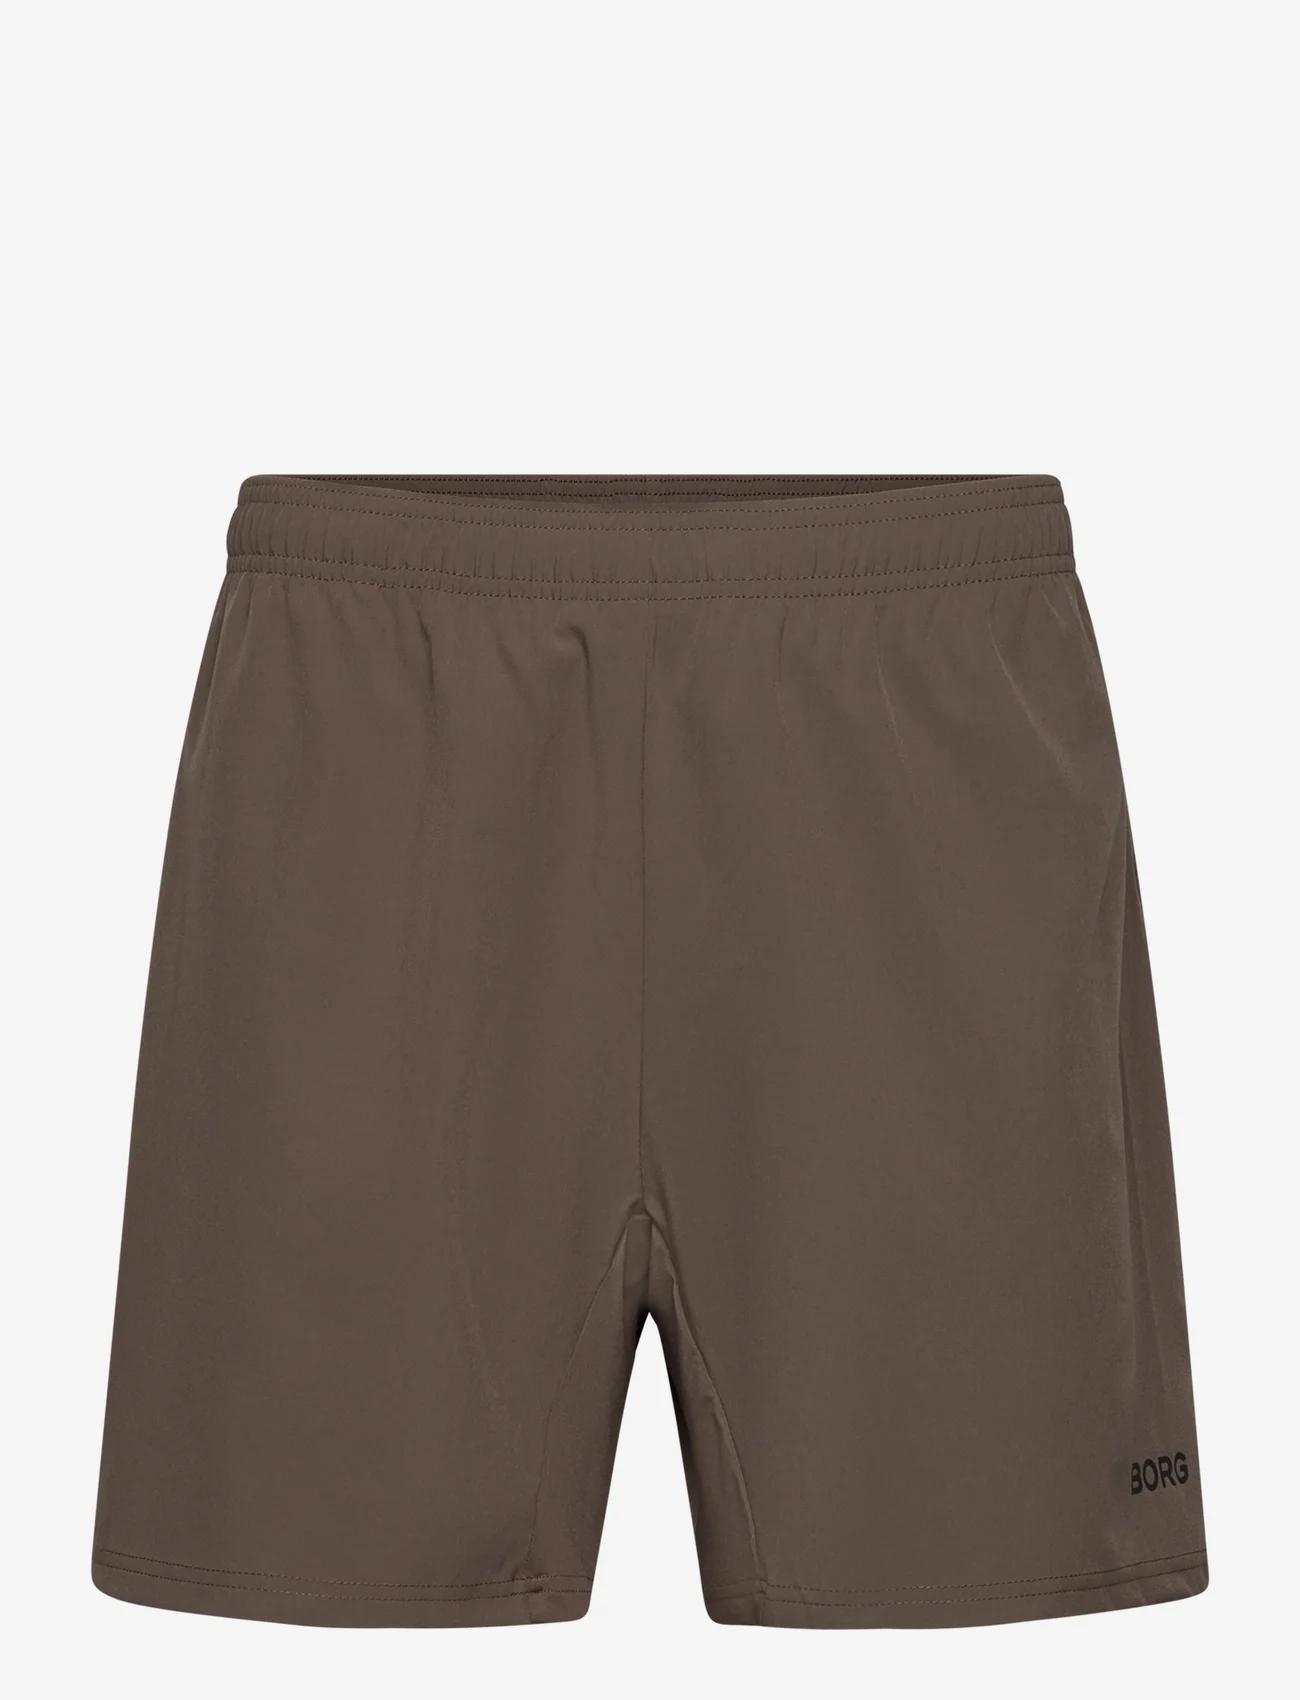 Björn Borg - BORG ESSENTIAL ACTIVE SHORTS - lowest prices - major brown - 0